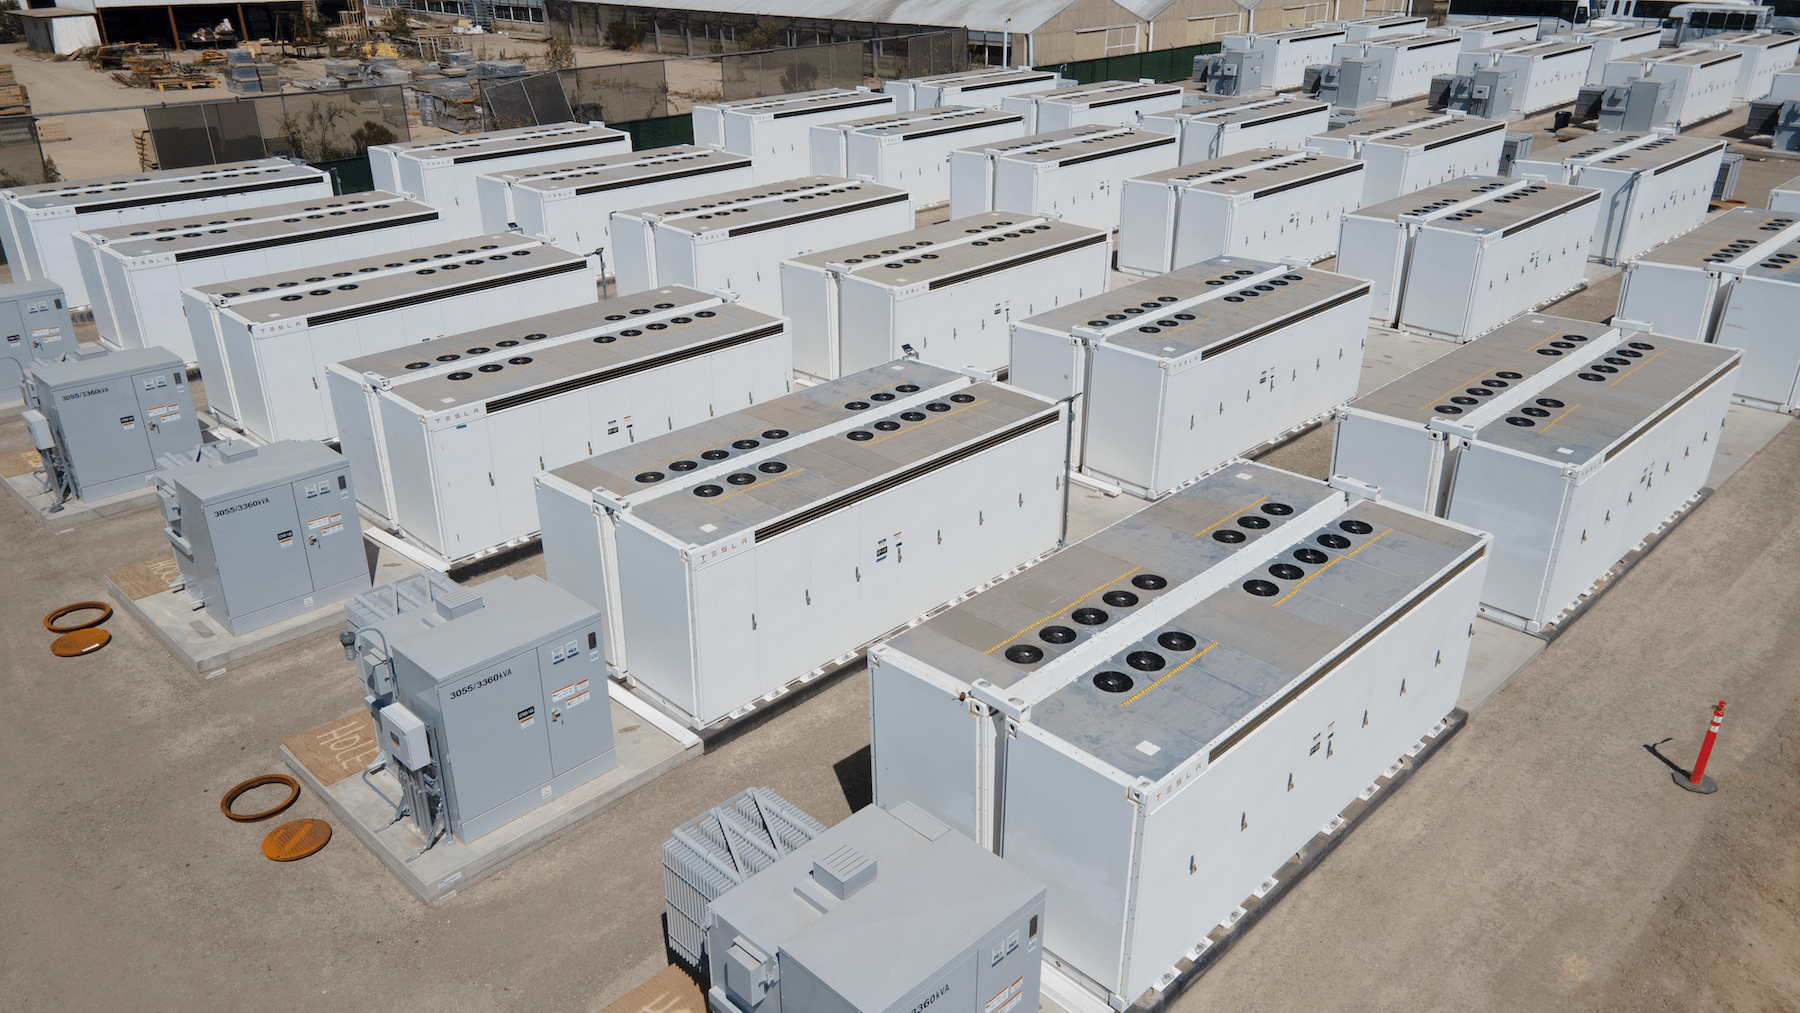 https://www.energy-storage.news/wp-content/uploads/2021/08/saticoy-battery-storage-closeup-courtesty-of-arevon.png